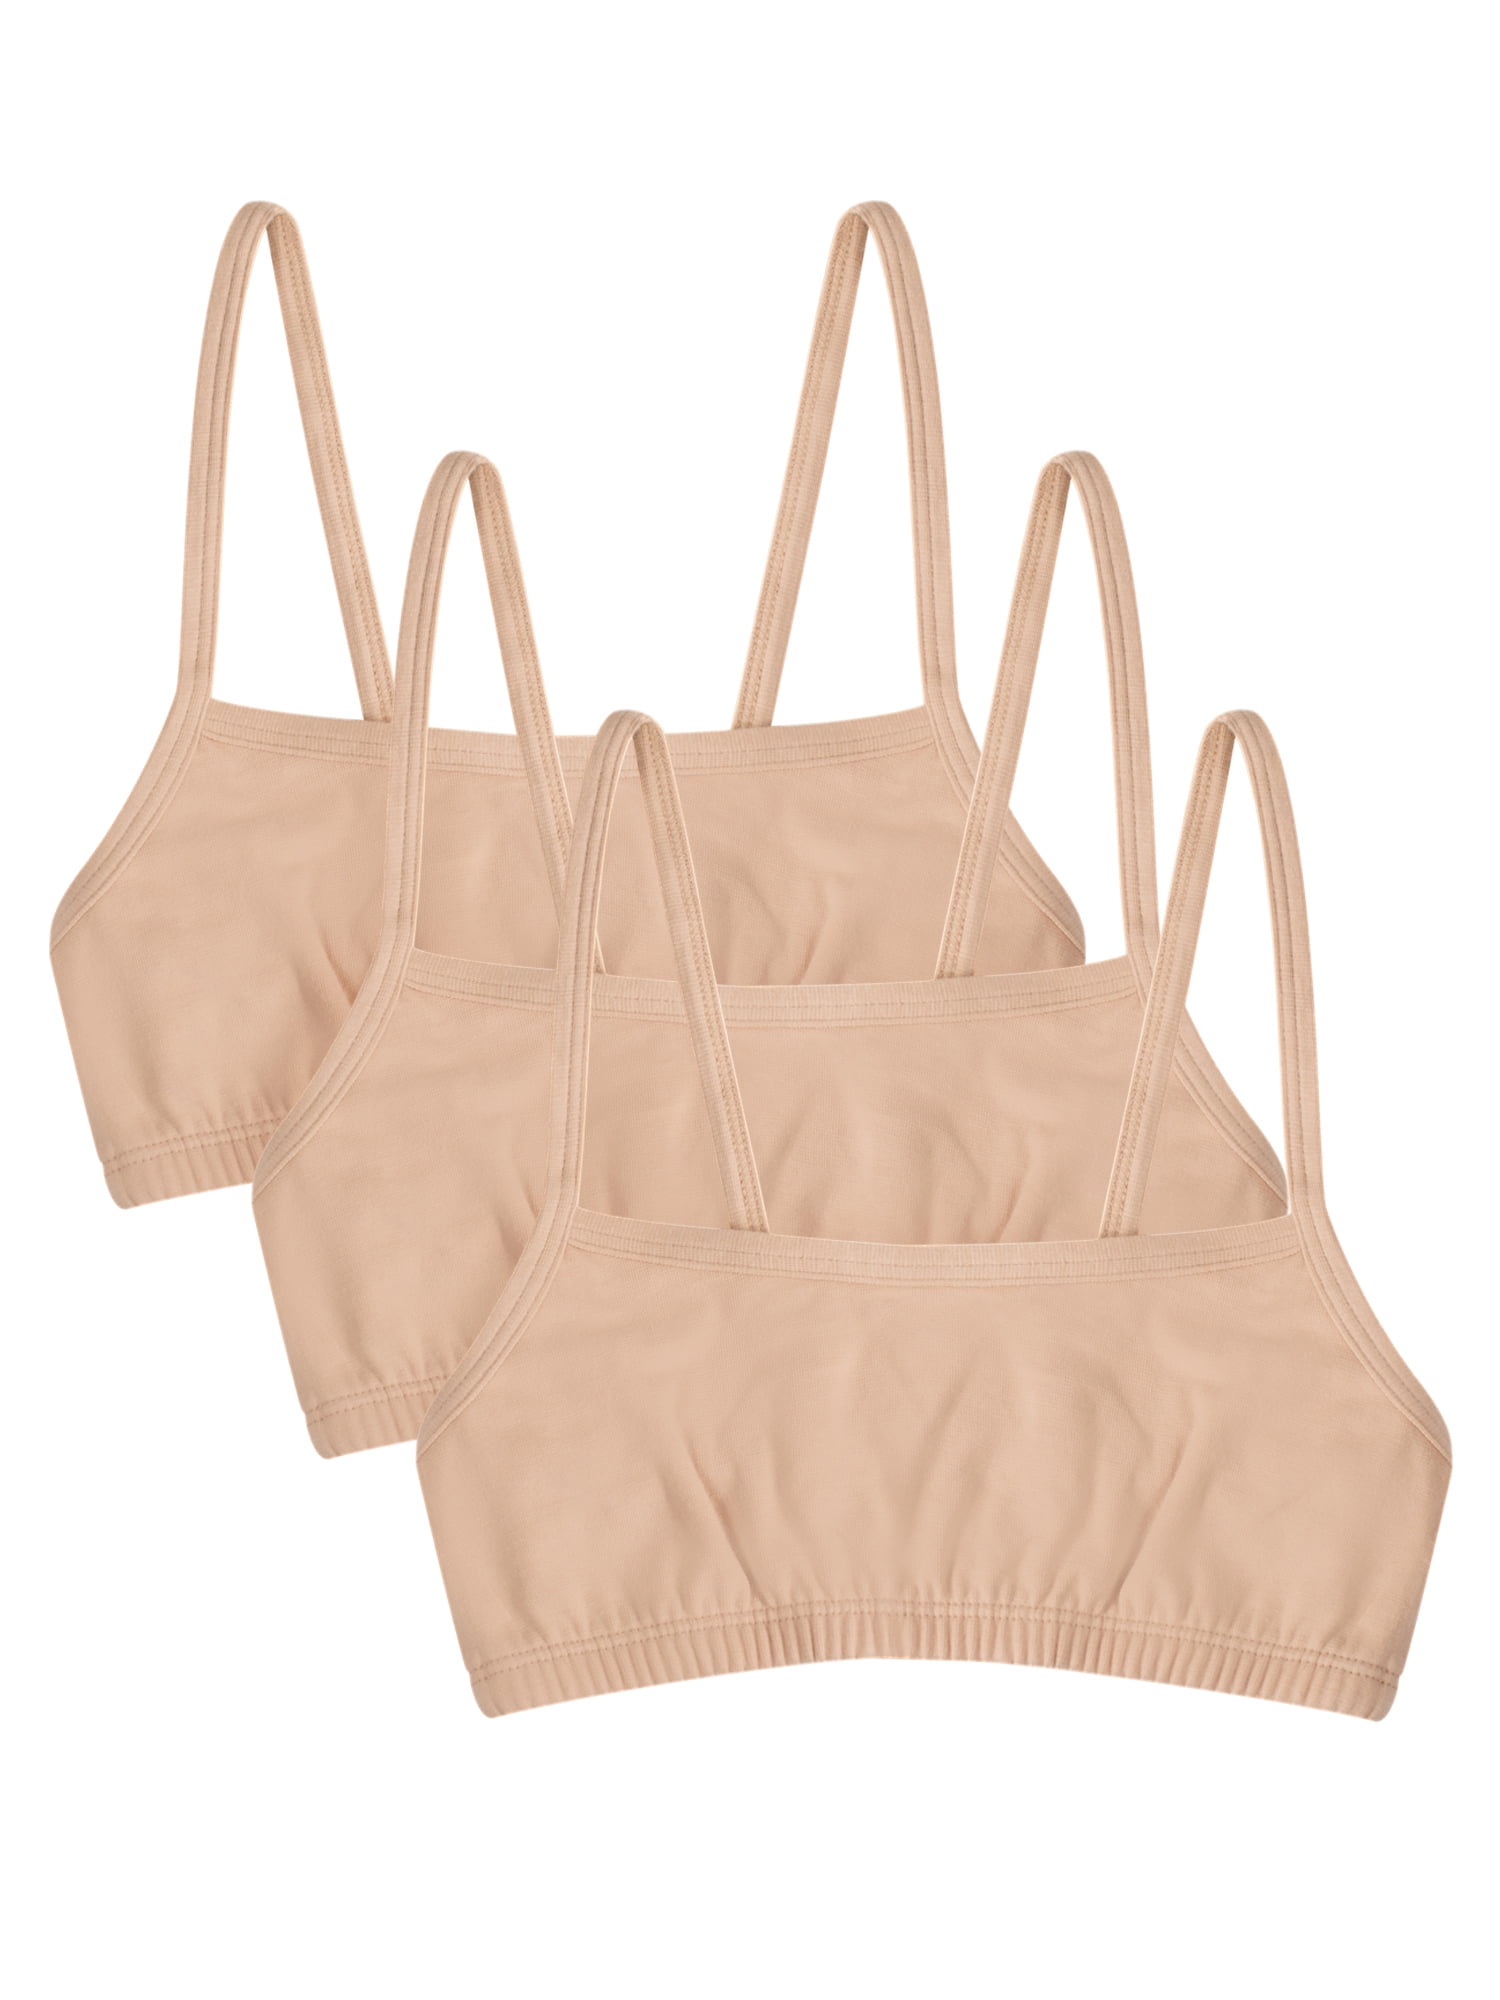 Fruit of the Loom Girls Pull Over Spaghetti Strap Sports Bra 3-Pack, Sizes  28-38